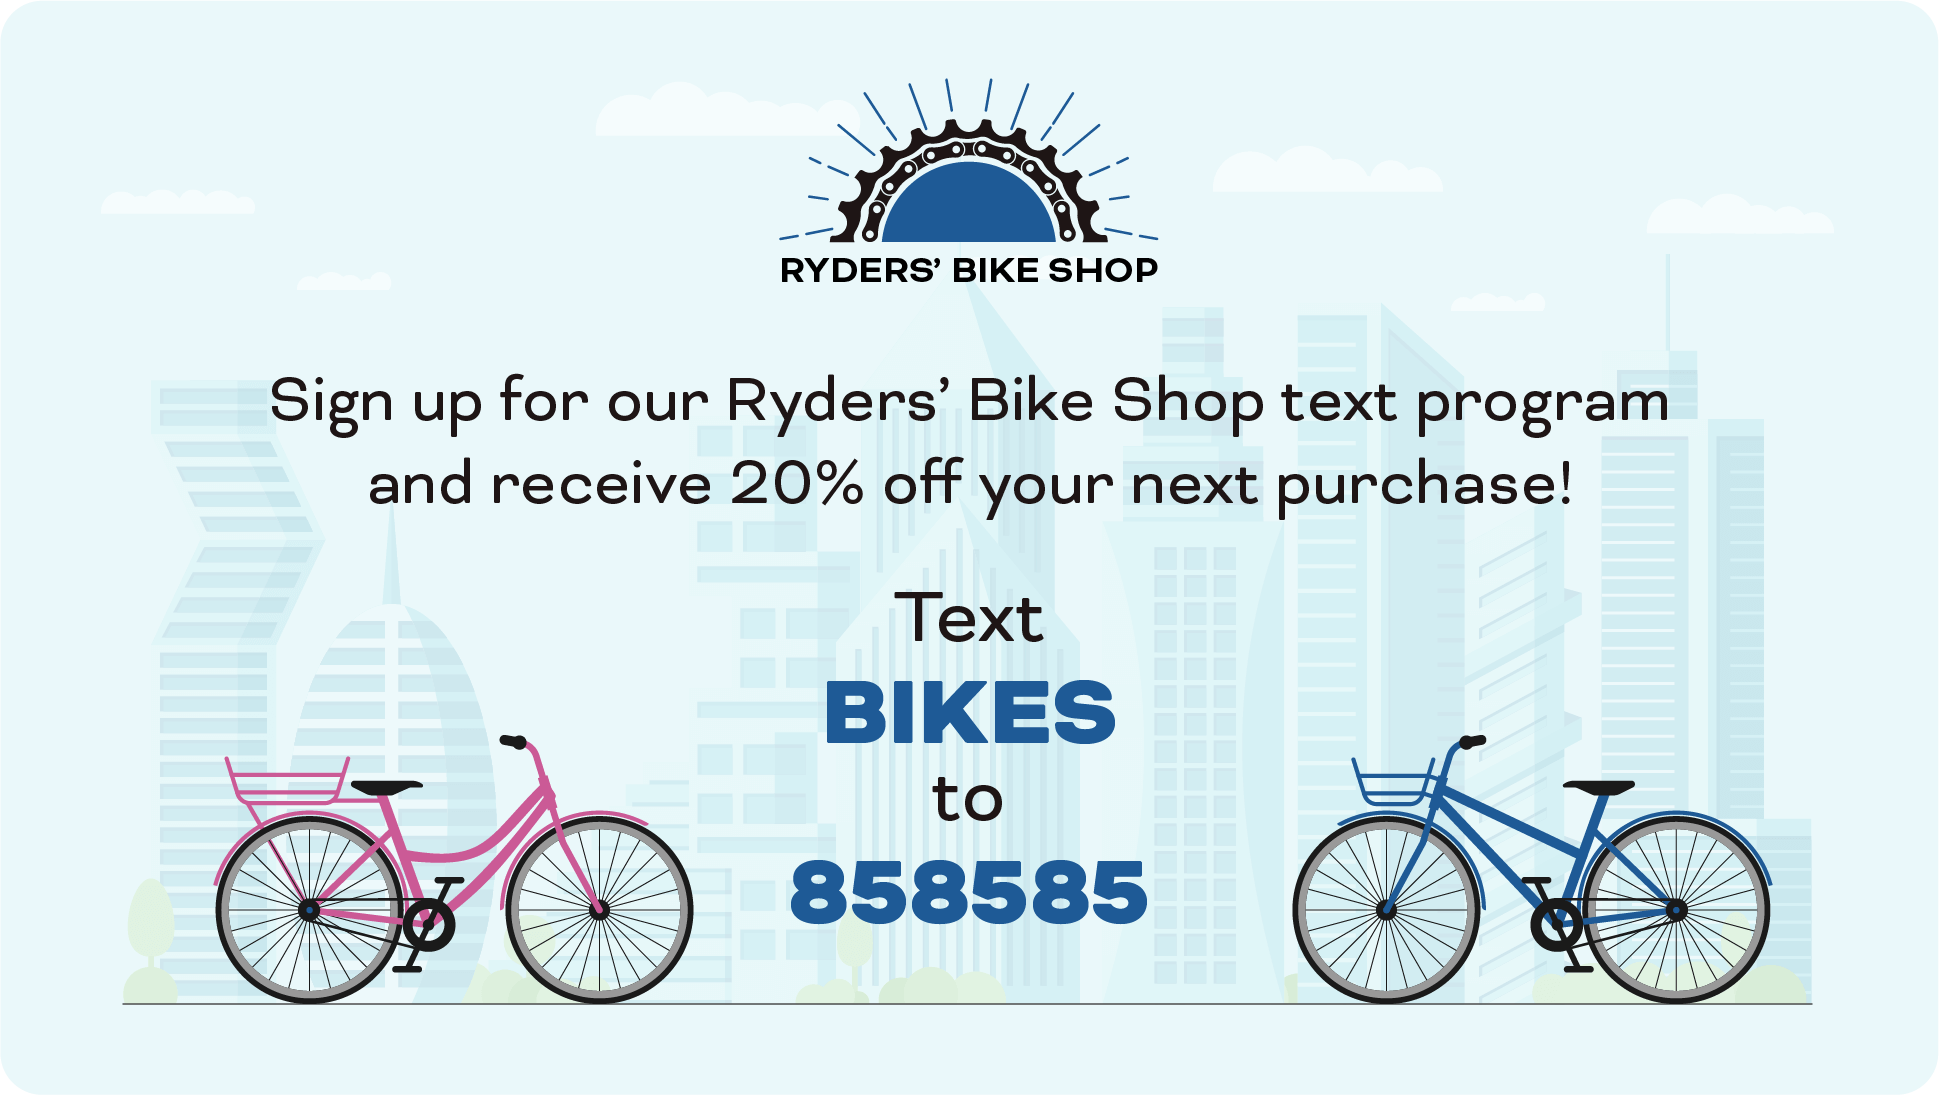 simple display ad that says Sign up for our Ryders’ Bike Shop text program and receive 20% off your next purchase! Text BIKES to 858585